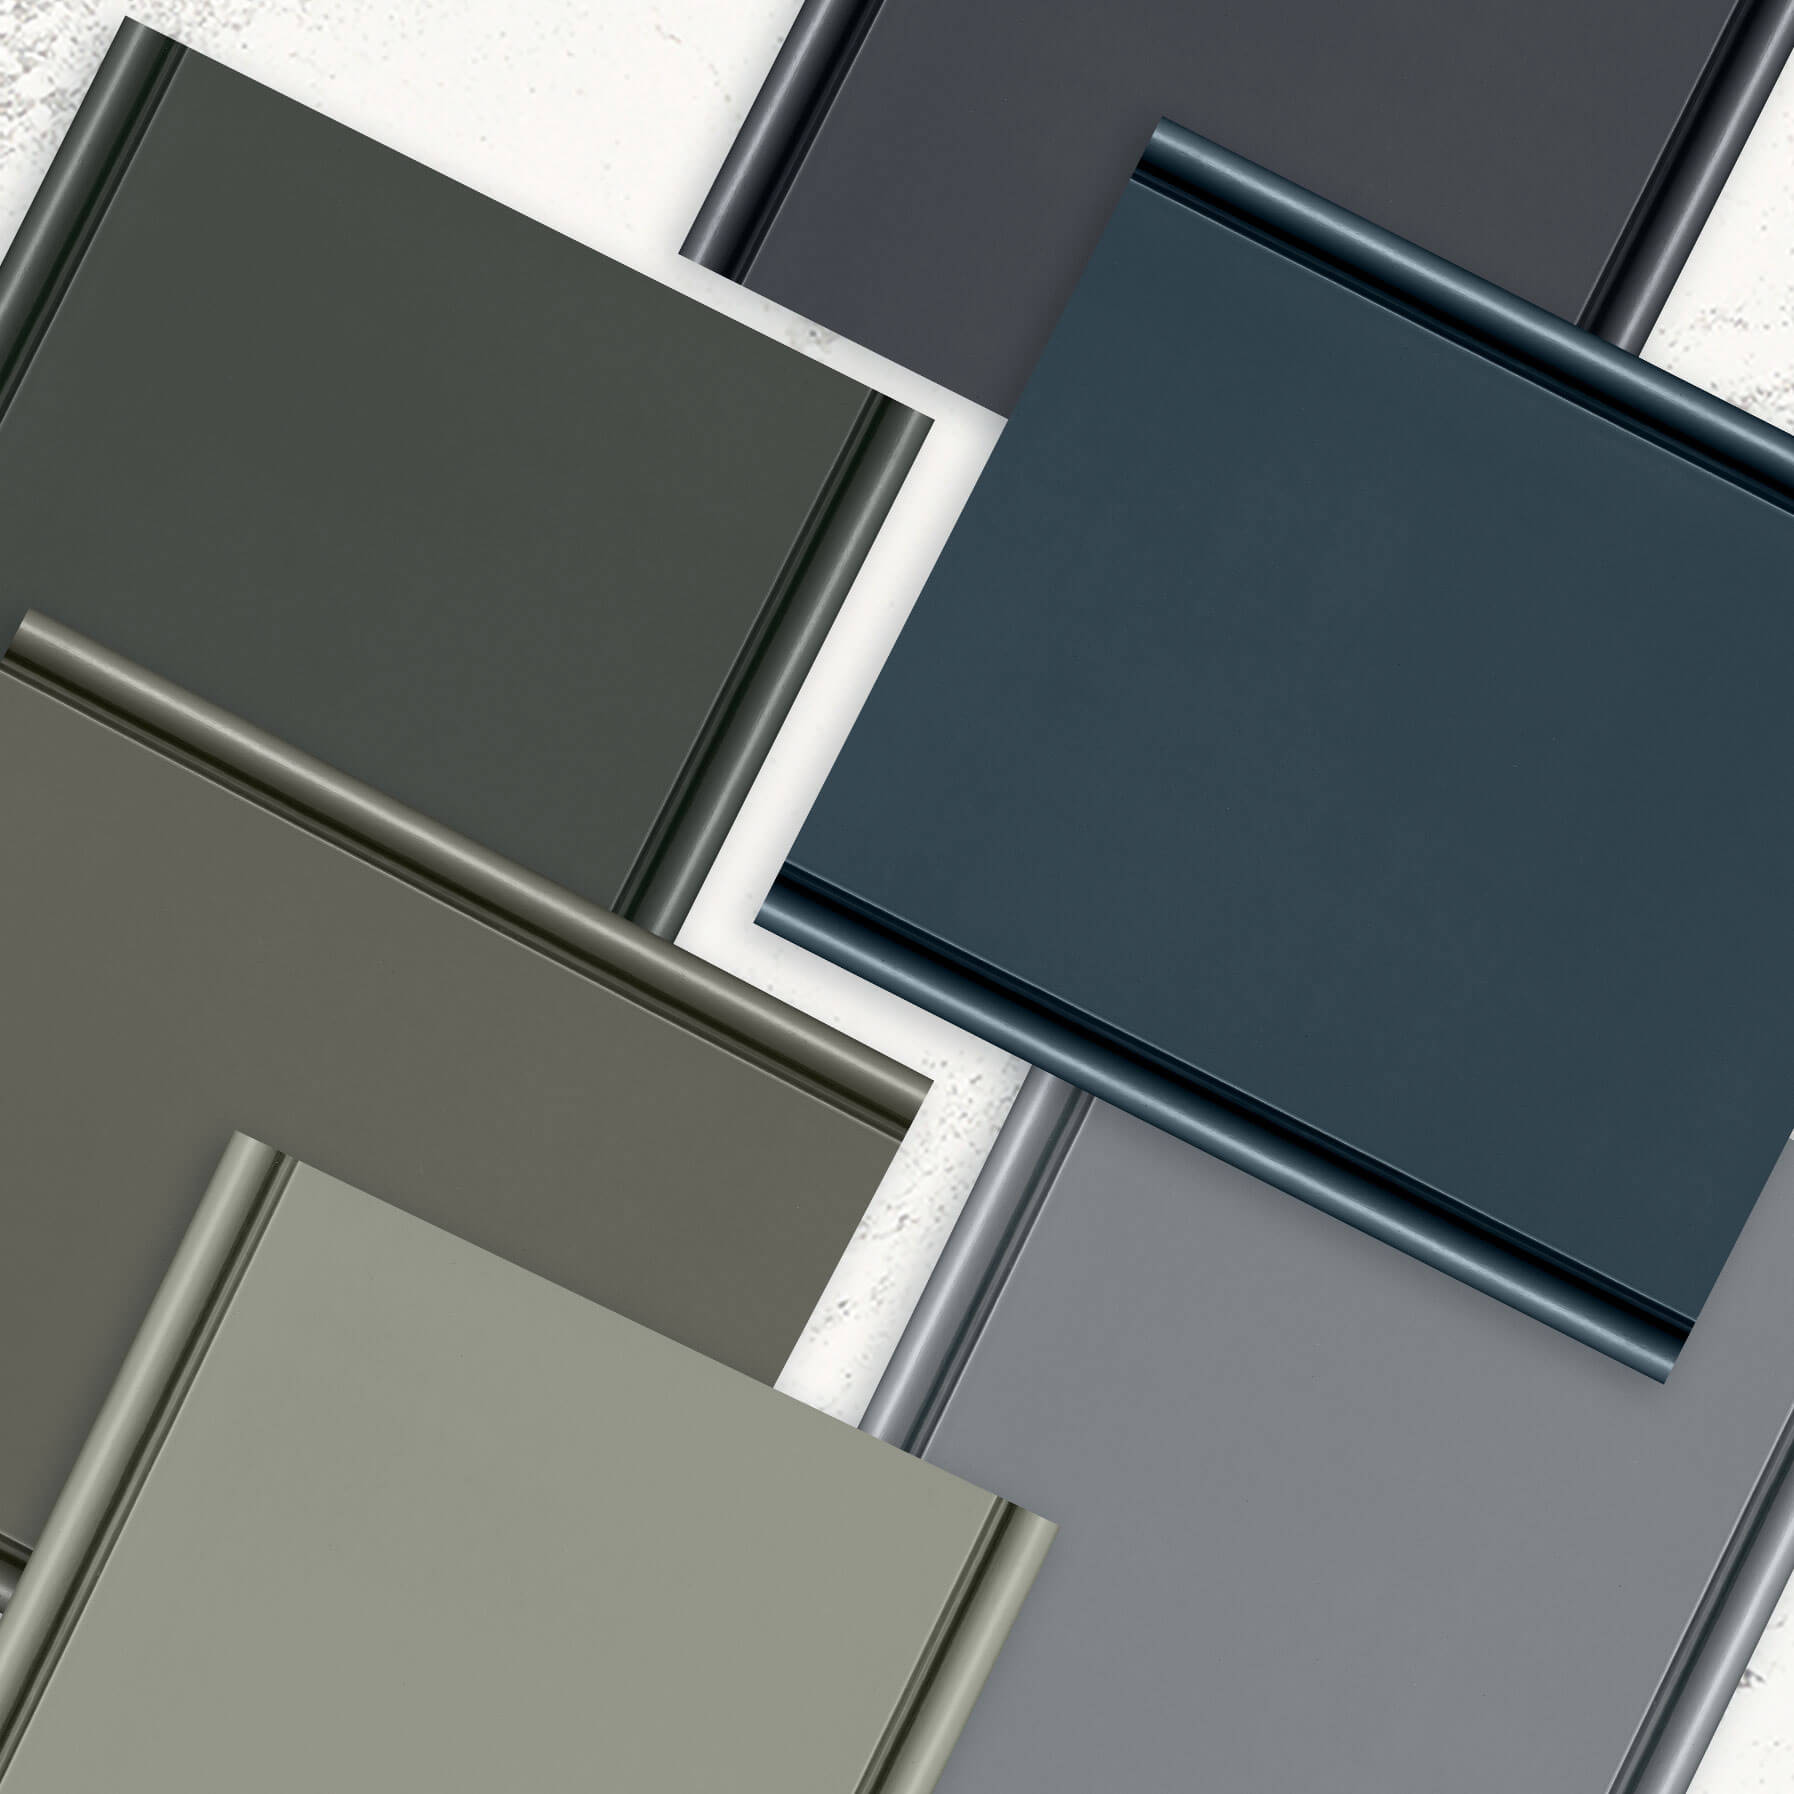 Trendy cabinet paint colors that will be long-term classic colors.